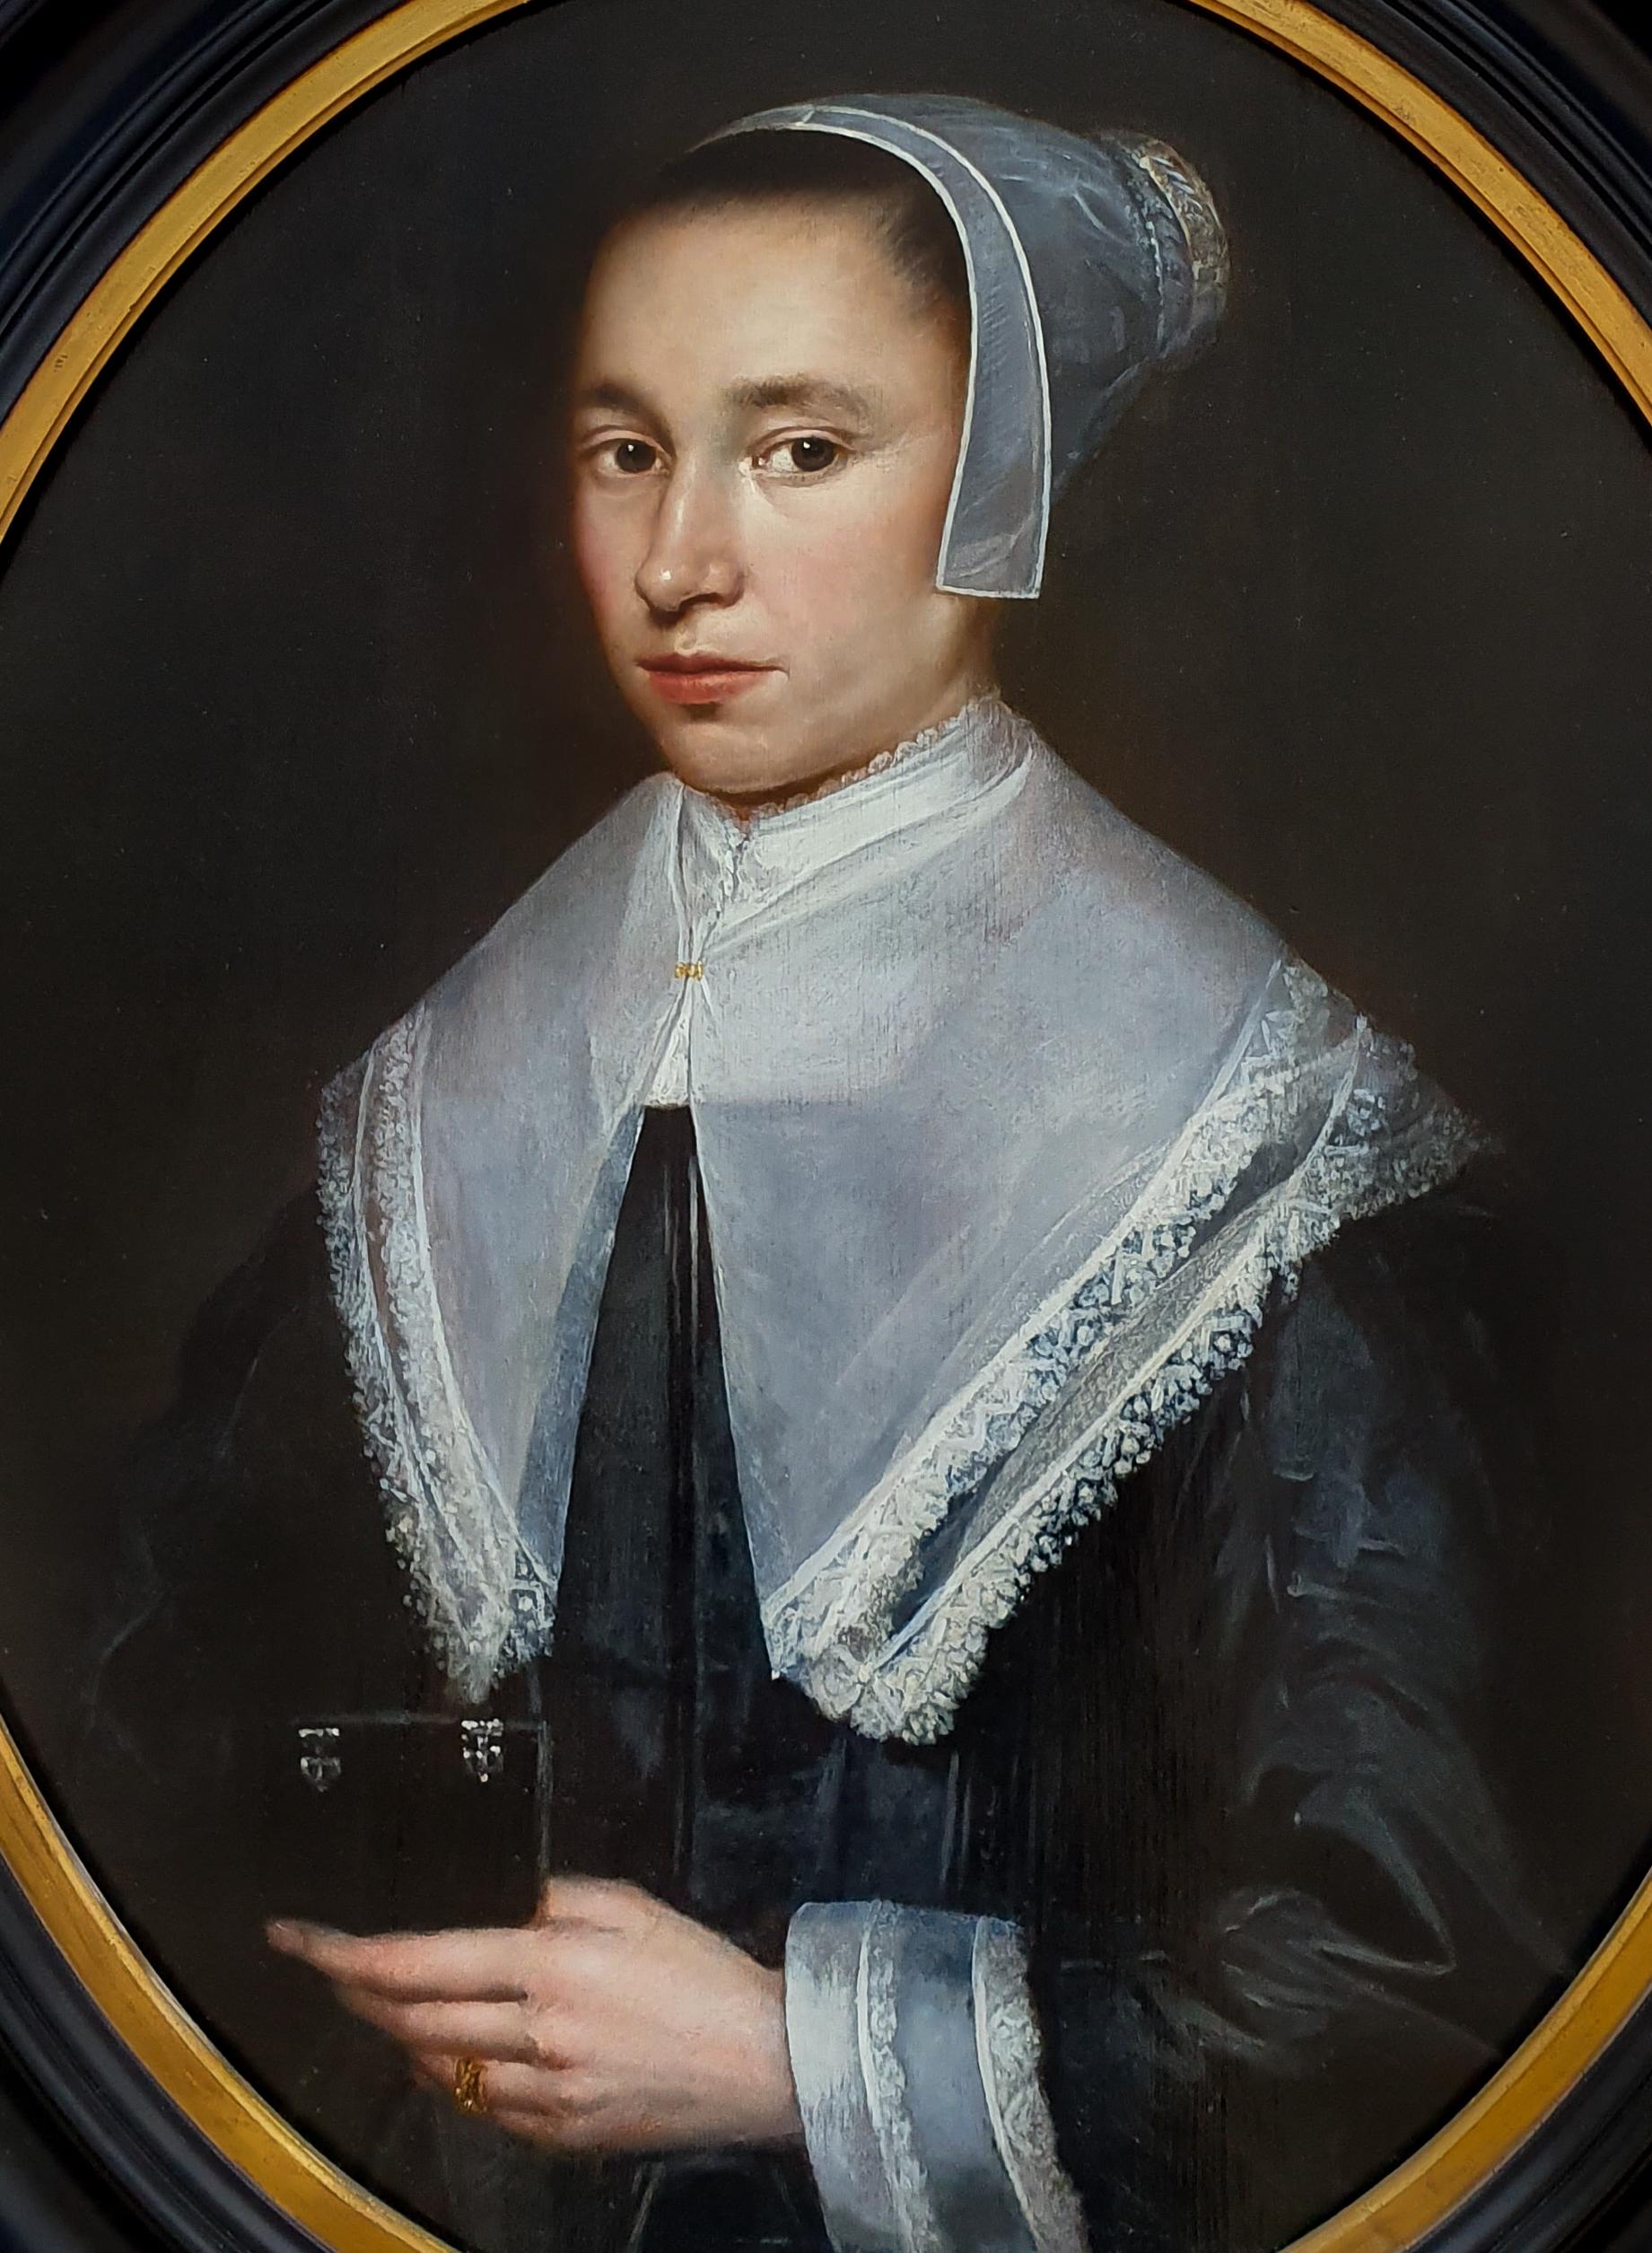 Titan Fine Art are pleased to present this exquisite portrait of a Lady.  The author of this striking portrait was a painter of considerable talent and ability to render a portrait with great realism.  It can be dated to between 1645 to 1650 based